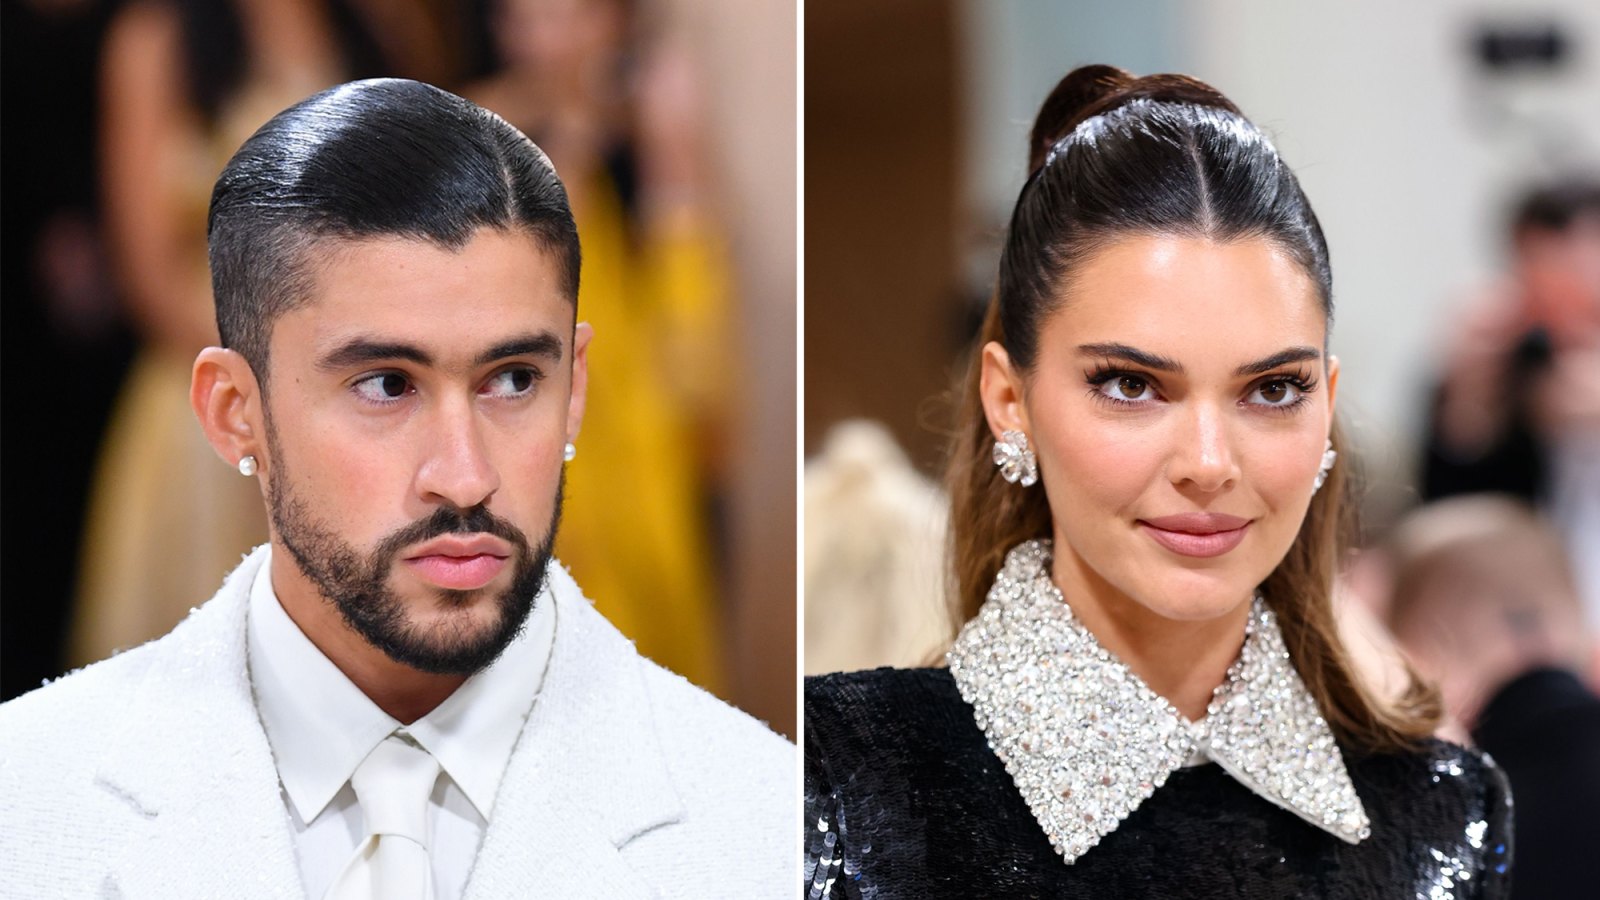 Bad Bunny, Kendall Jenner dating? Stars appear in Gucci campaign